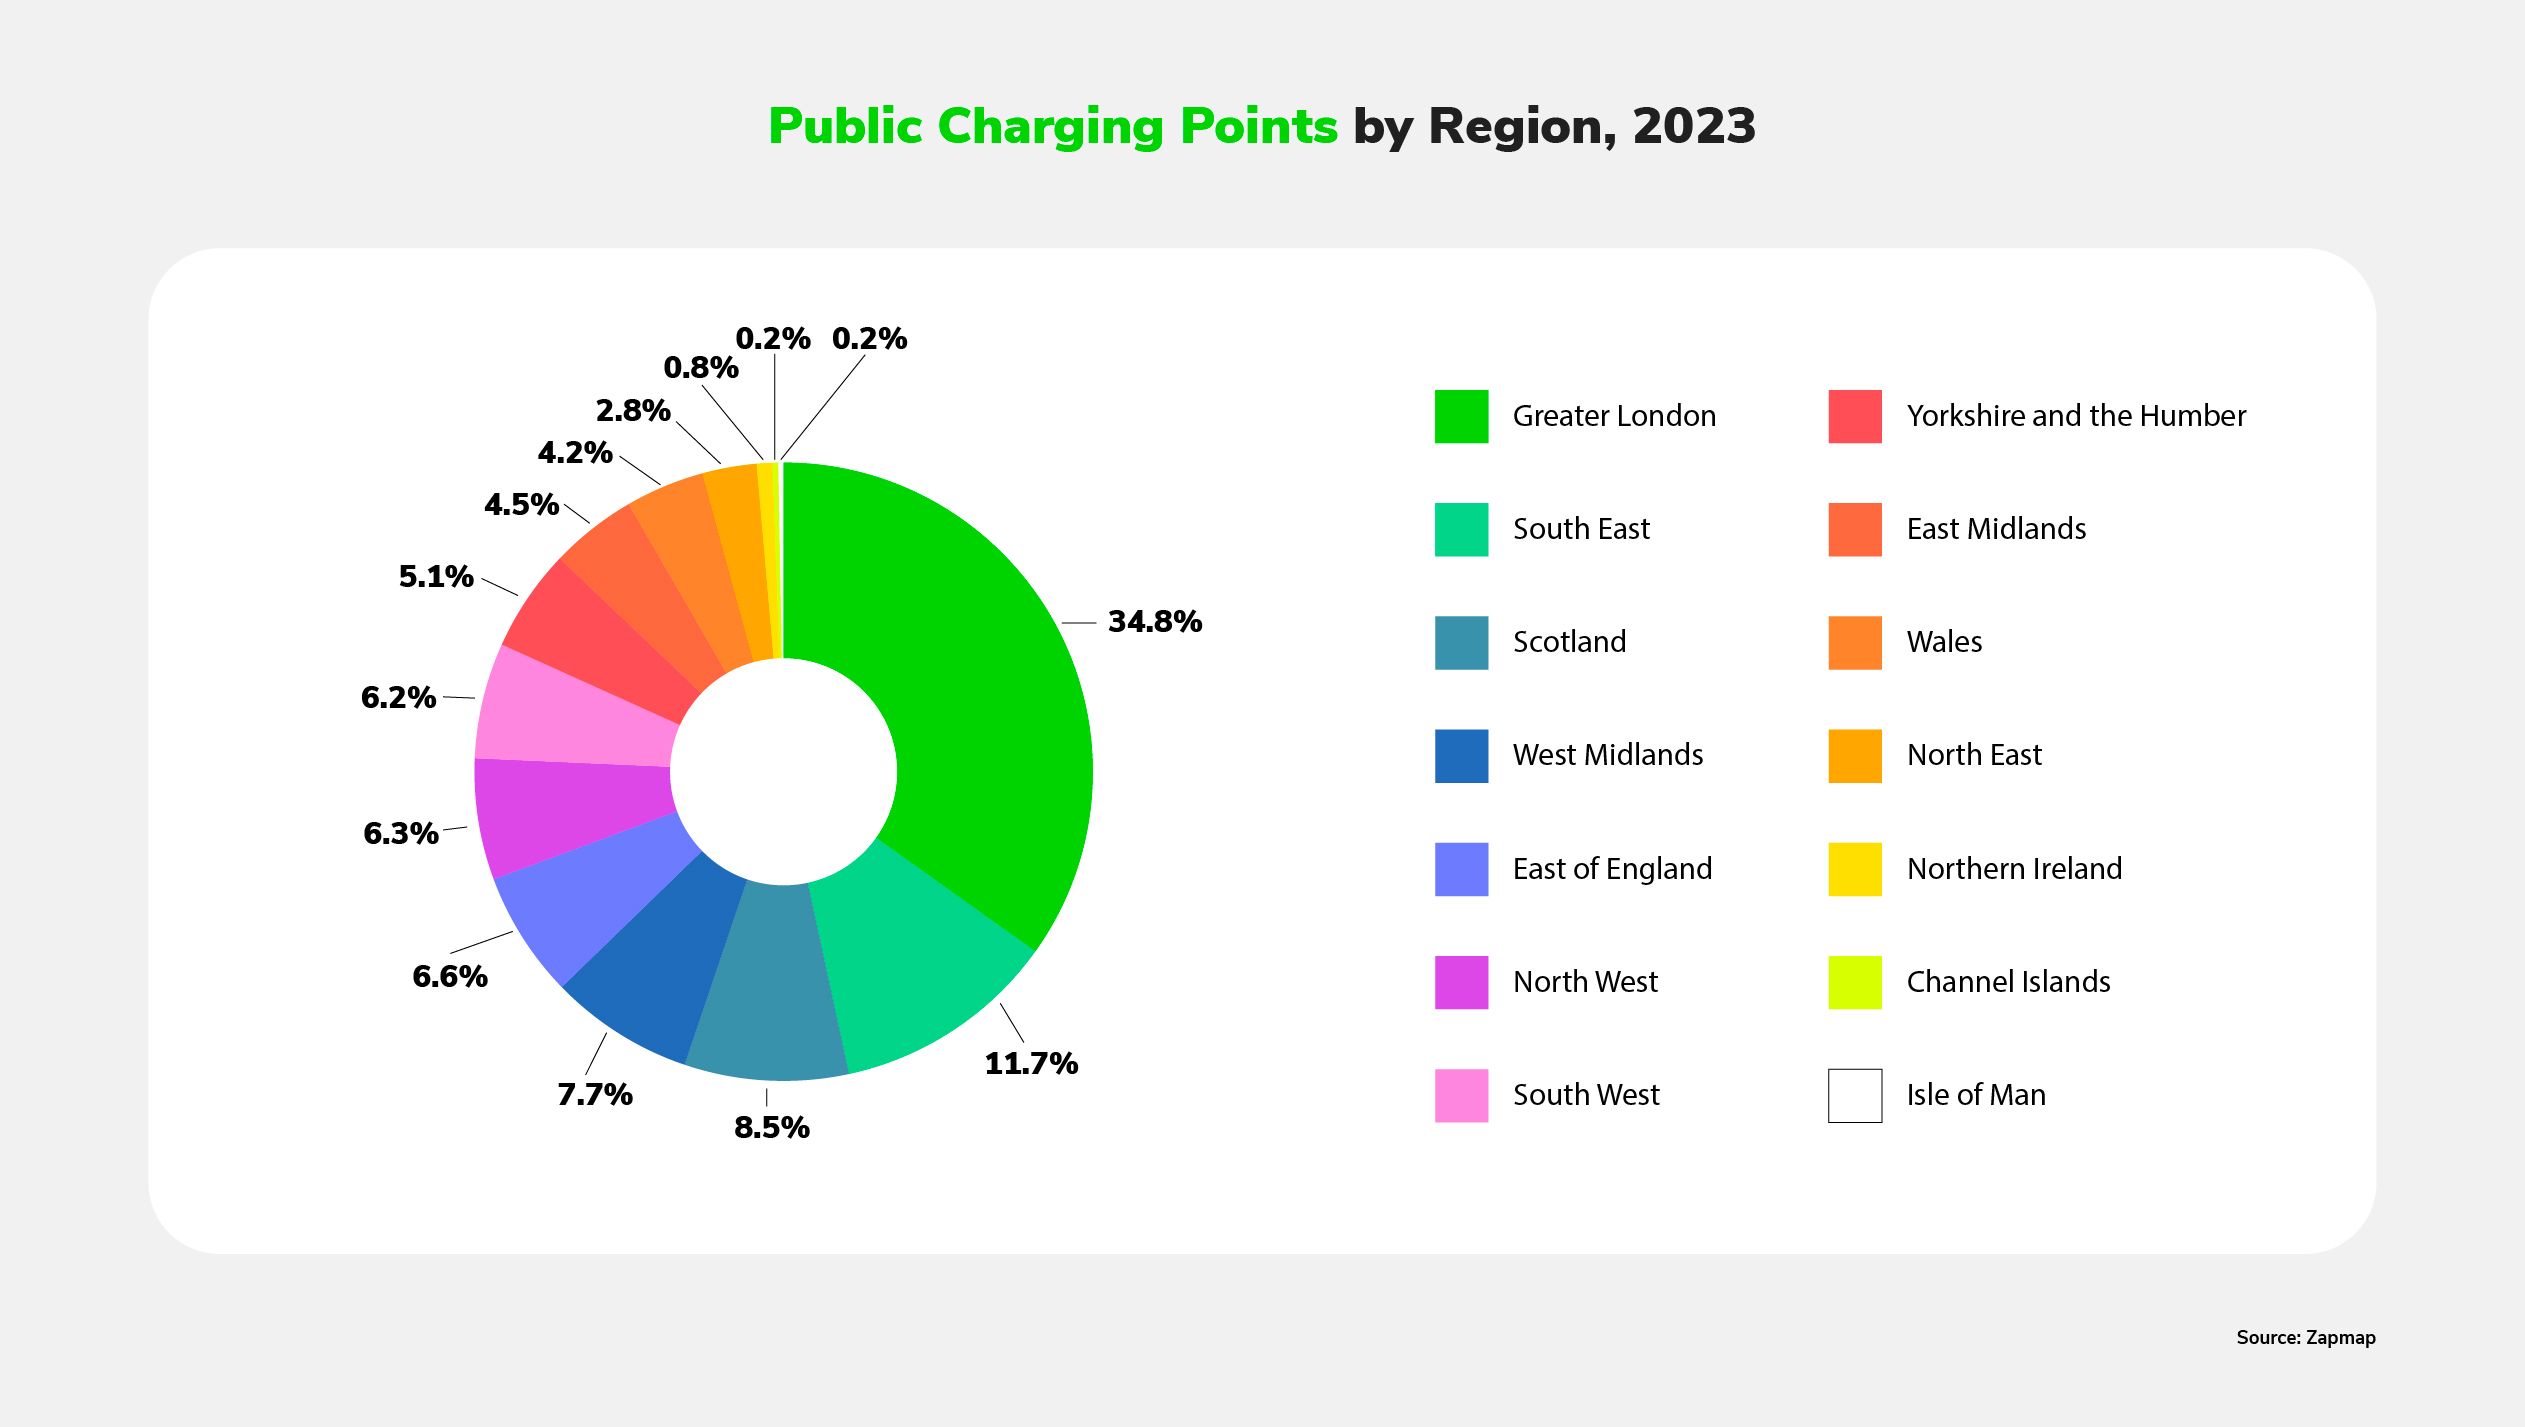 A pie chart showing the geographical distribution of public charging points in the UK